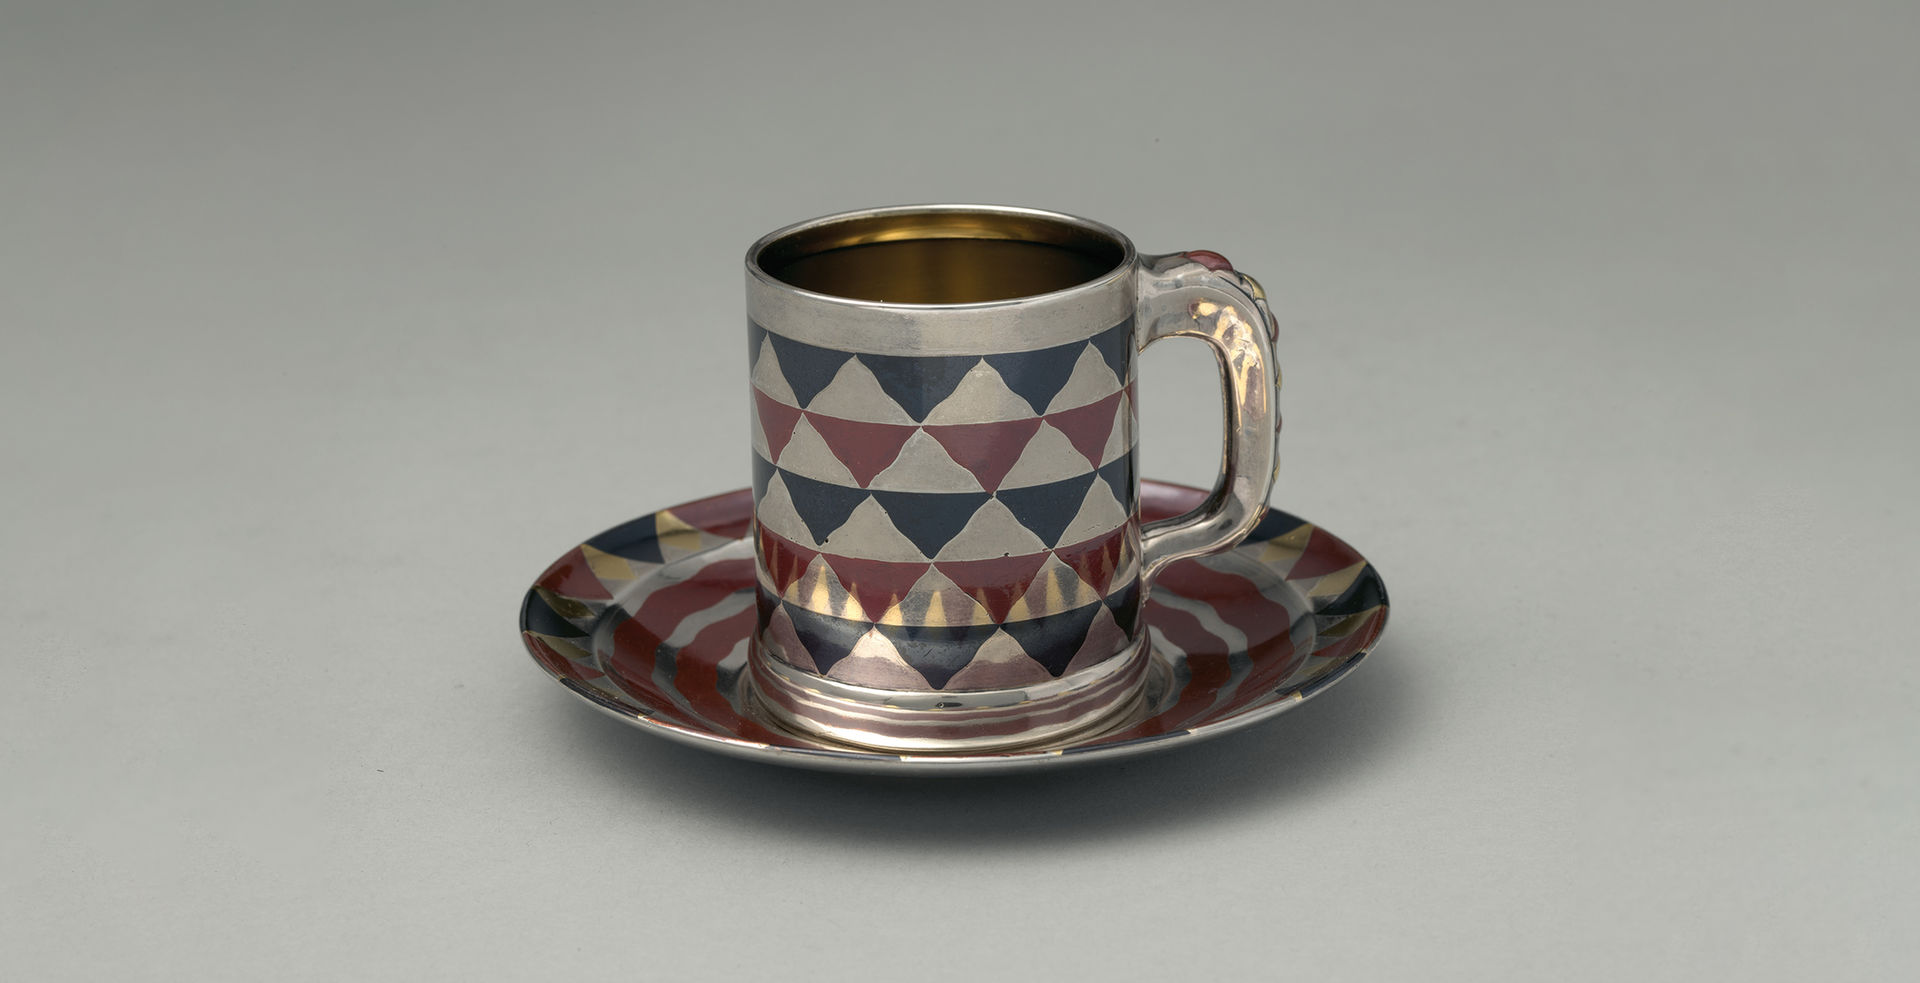 A silver, blue, and maroon cylindrical cup with a handle rests on a matching saucer. The cup and saucer are reflective and adorned with an inlay design of a checkerboard pattern of wavy triangle shapes.